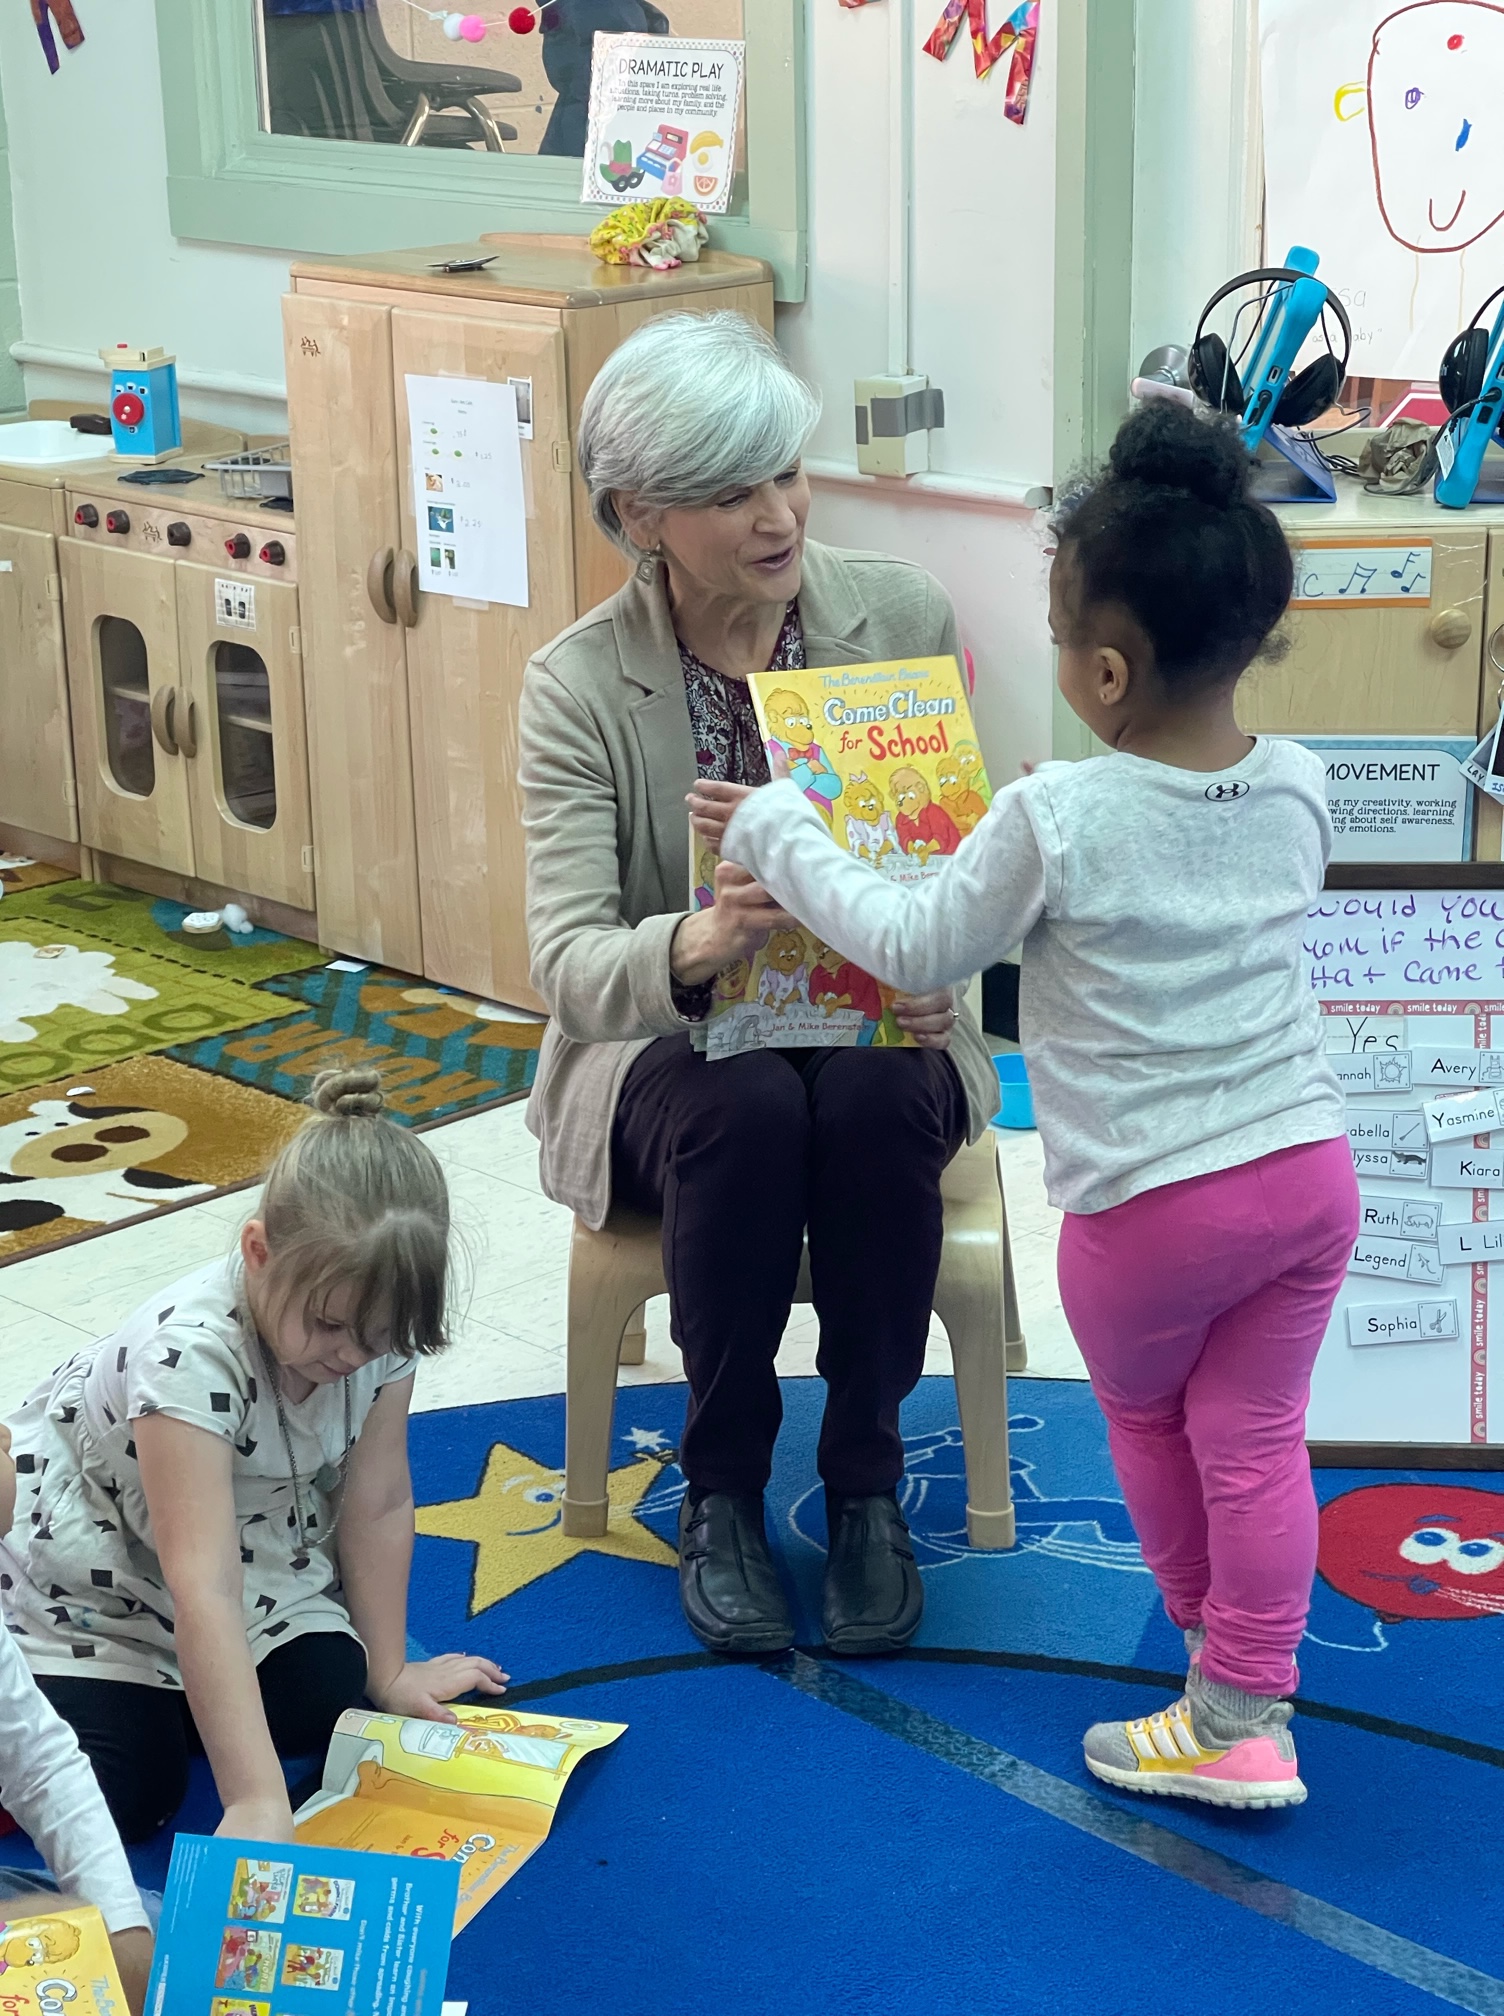 Your donations at work! Thank you to the teachers and program administrators for helping us build home libraries for the Head Start and preschool programs!